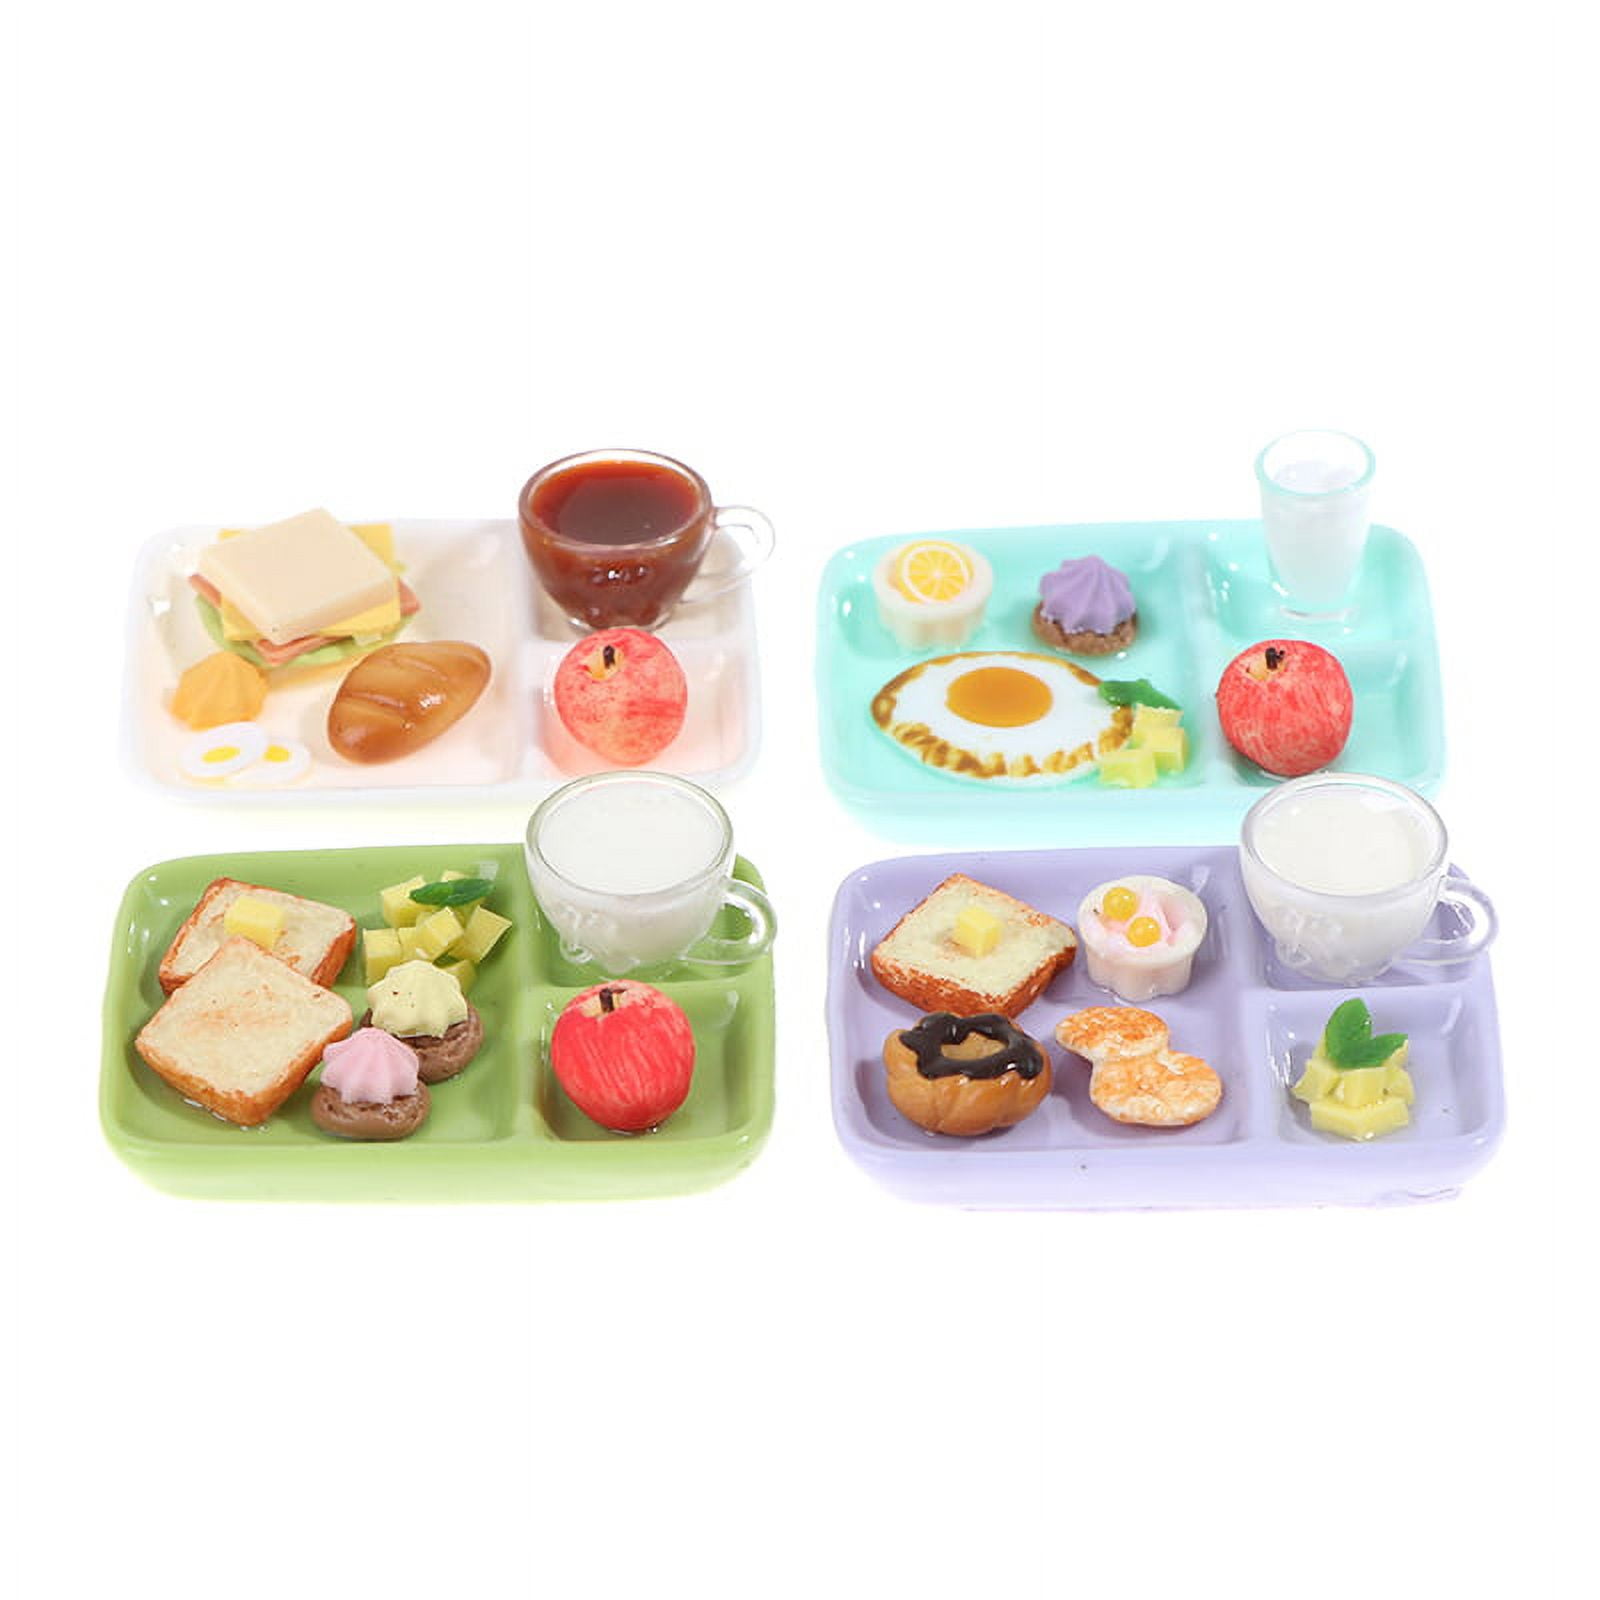 American Girl School Hot Lunch Tray Set New in Box for dolls